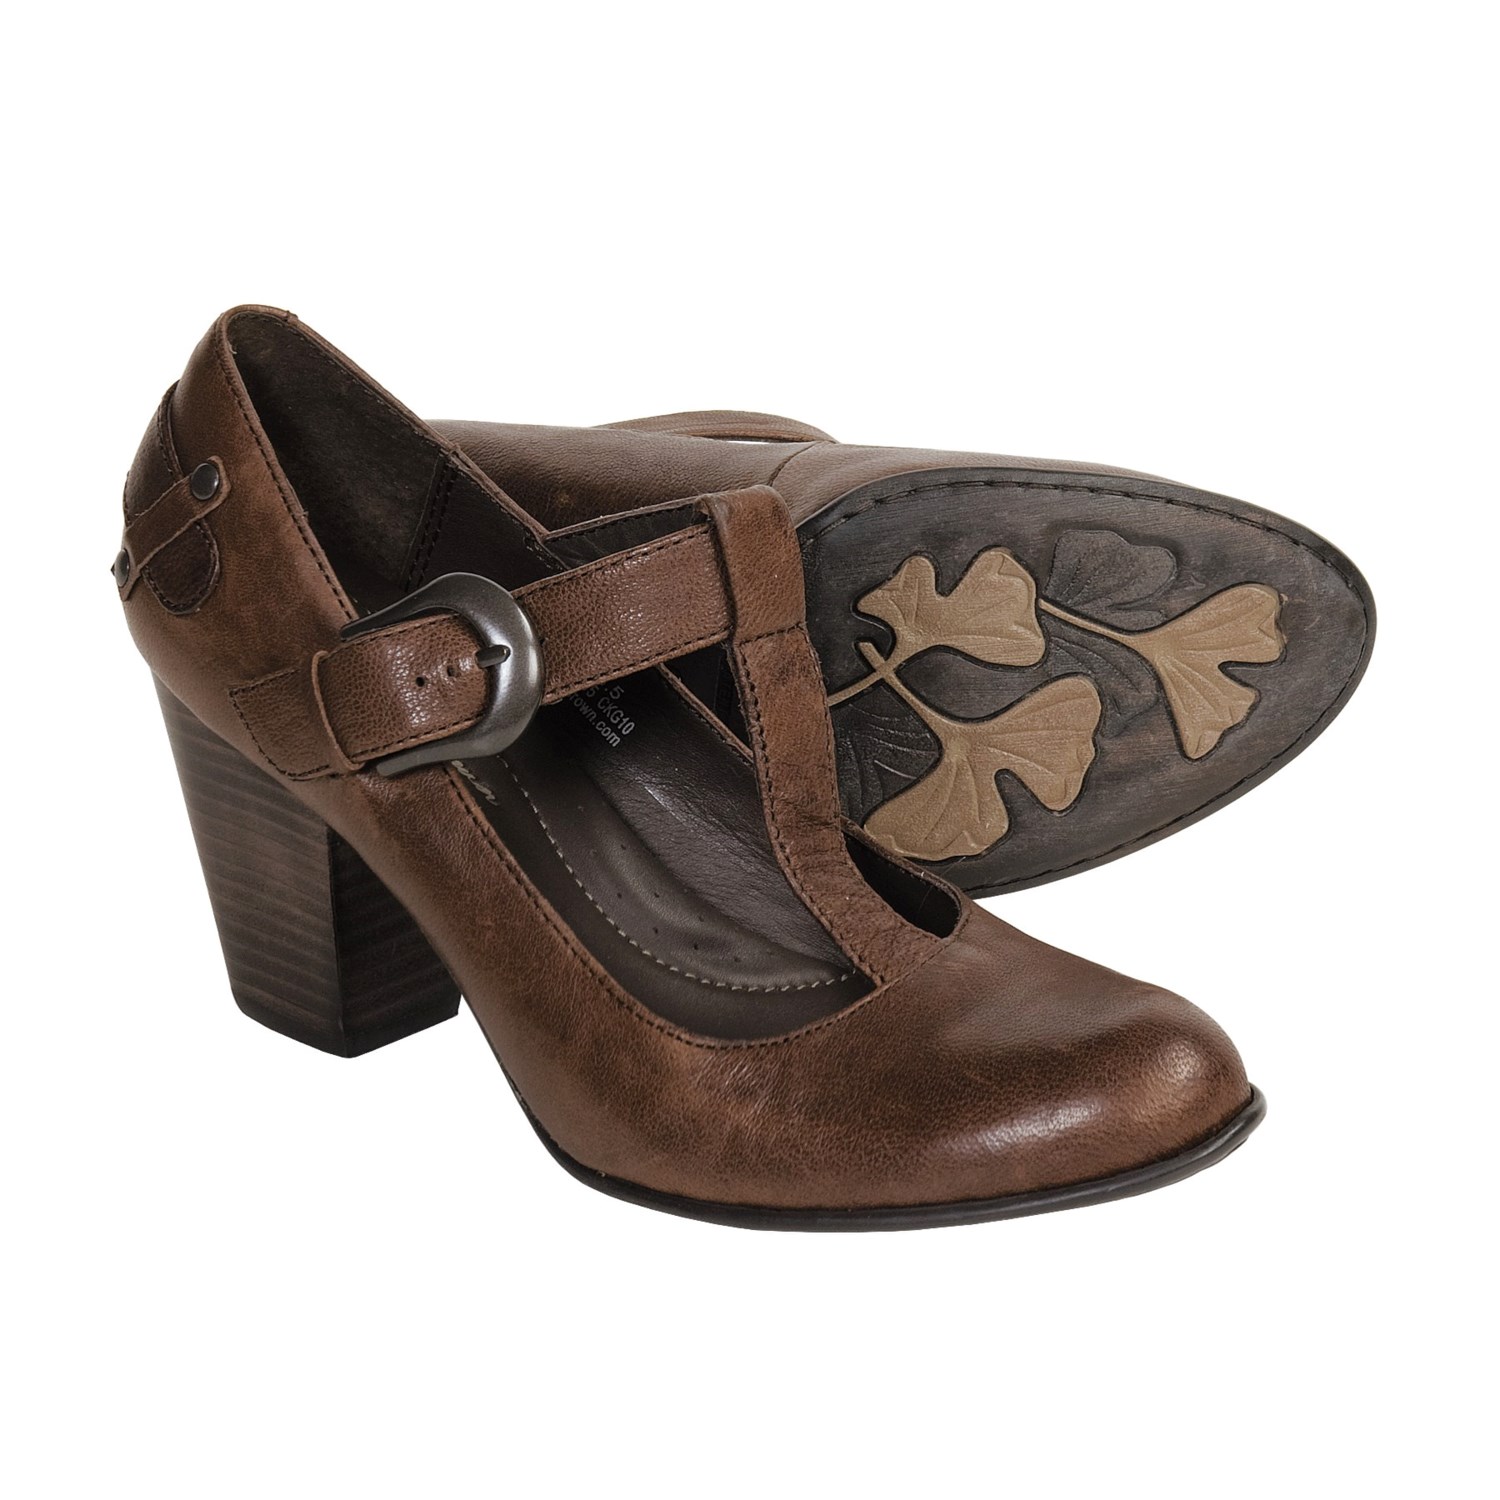 Download this Born Ofelia Bay Vintage Strap Shoes For Women Brown picture